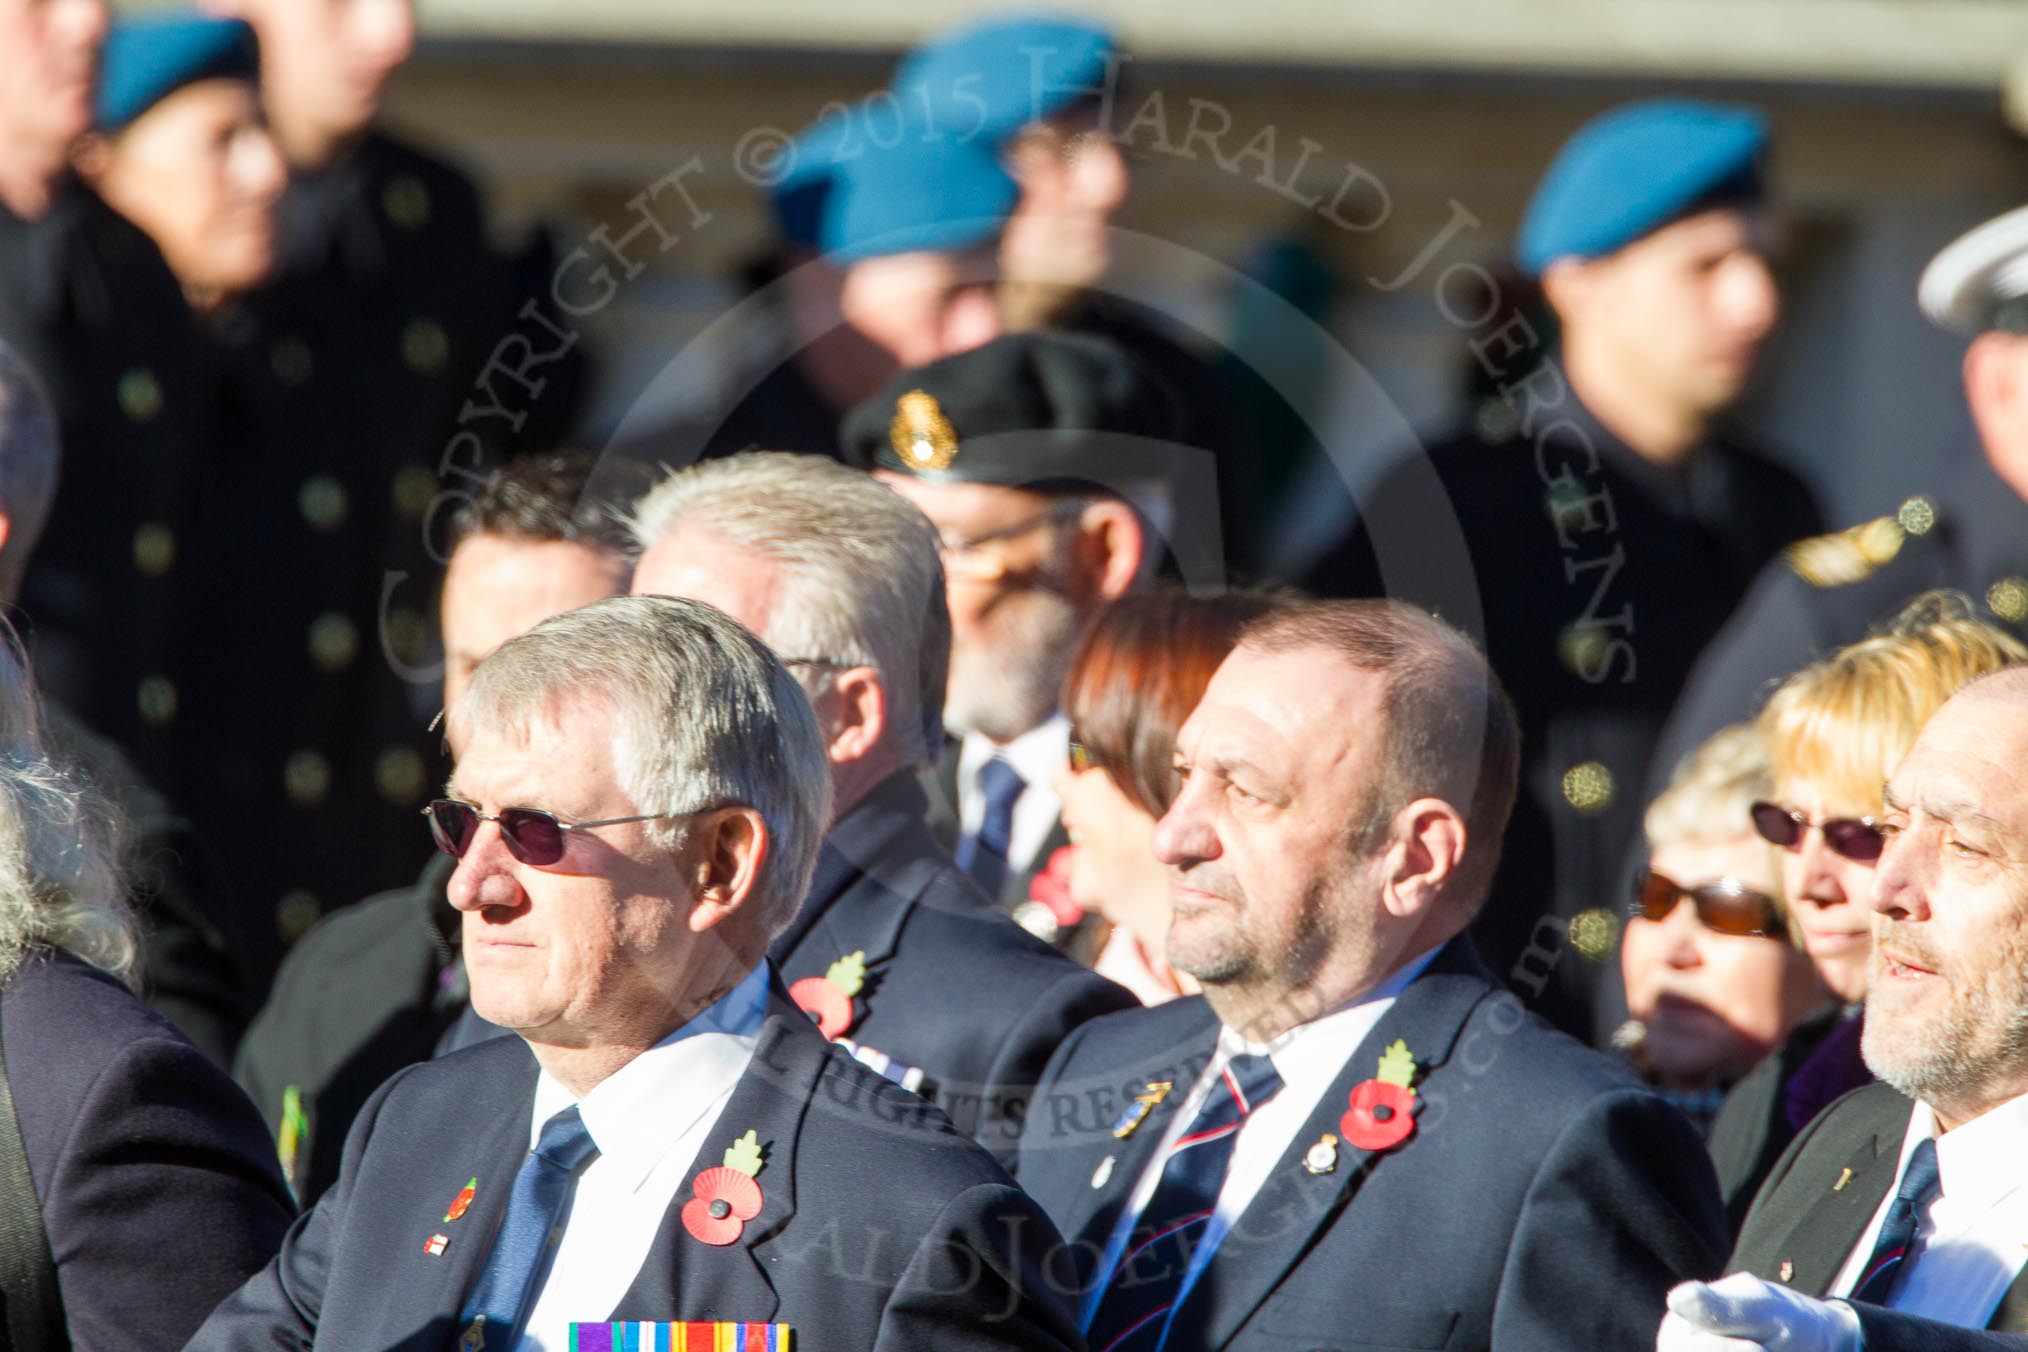 Remembrance Sunday Cenotaph March Past 2013: E21 - HMS Ganges Association..
Press stand opposite the Foreign Office building, Whitehall, London SW1,
London,
Greater London,
United Kingdom,
on 10 November 2013 at 11:46, image #502